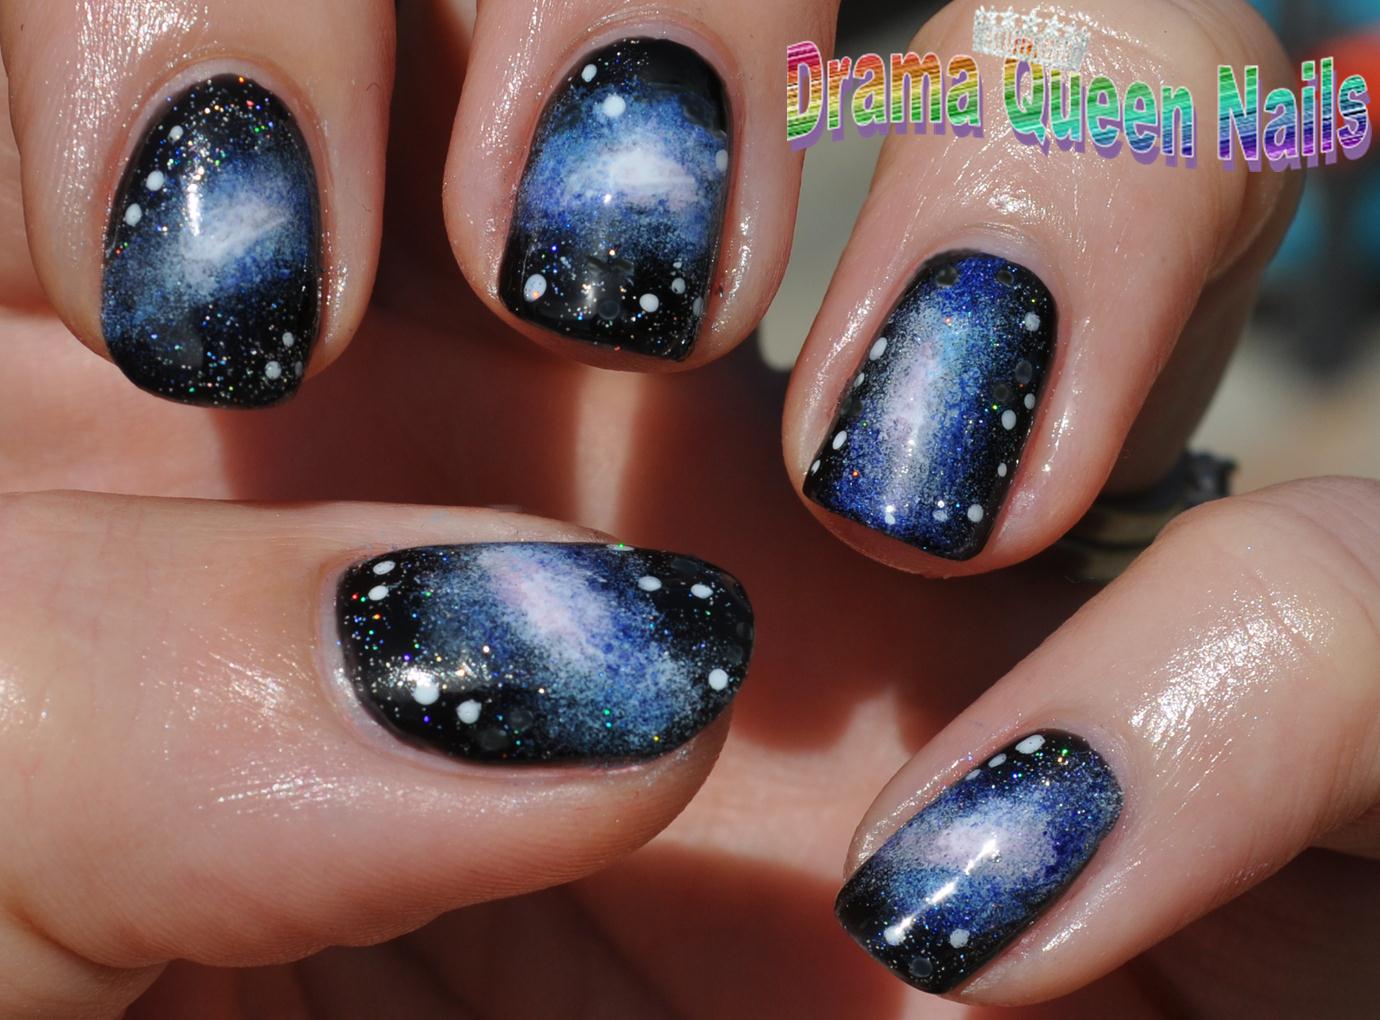 4. Step by Step Guide to Achieving the Perfect Galaxy Nails - wide 1